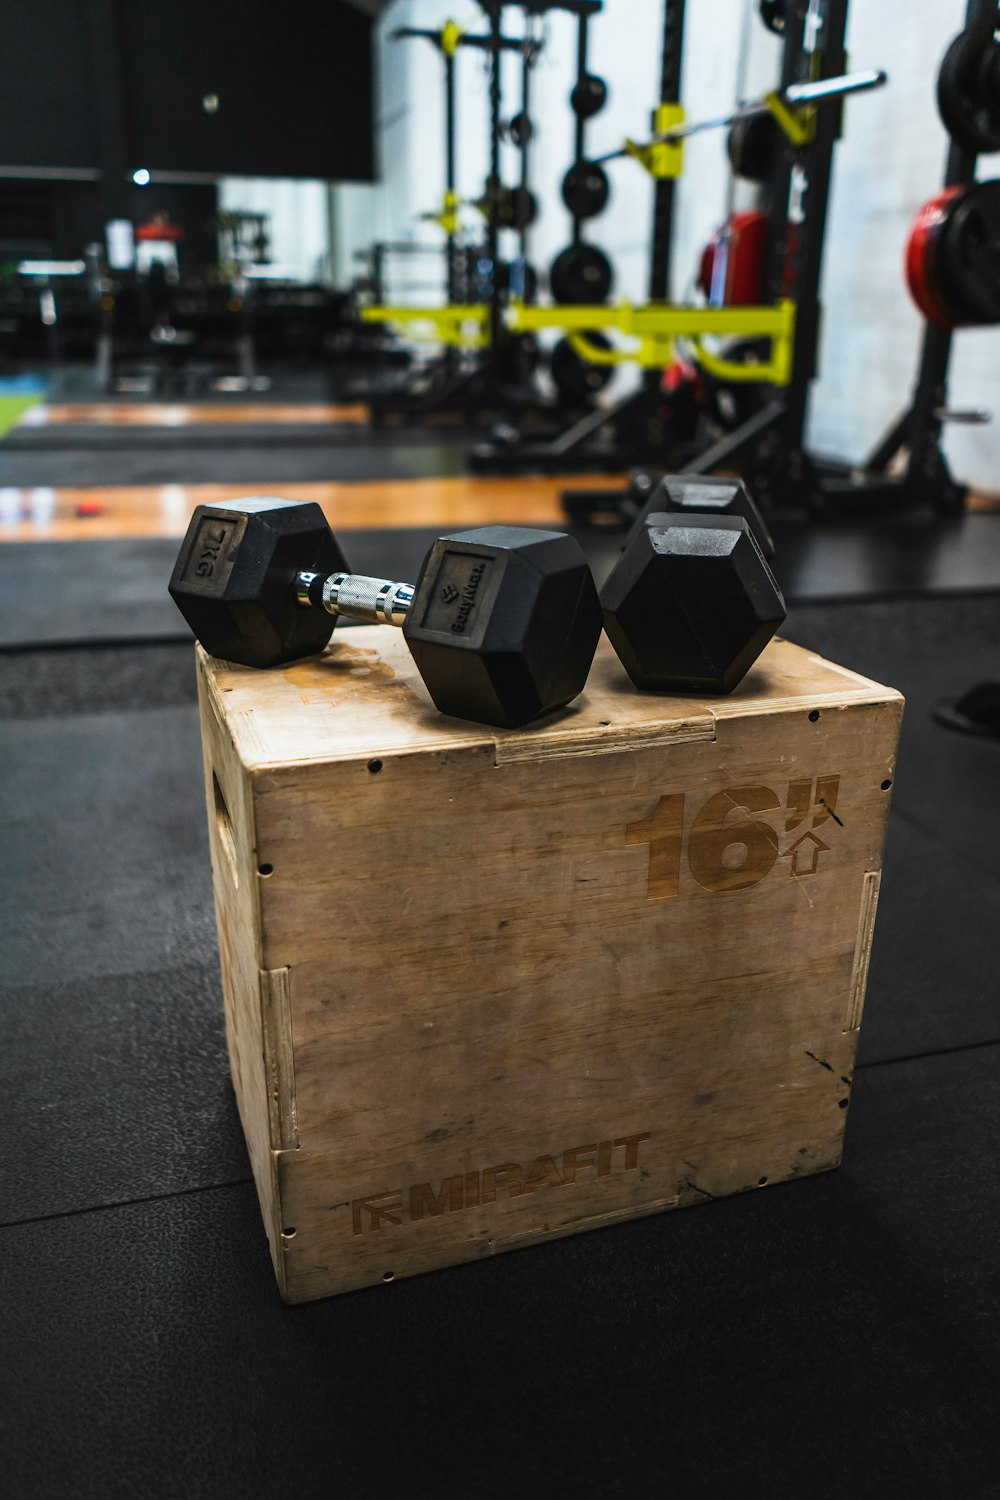 black and gray dumbbells on brown wooden crate